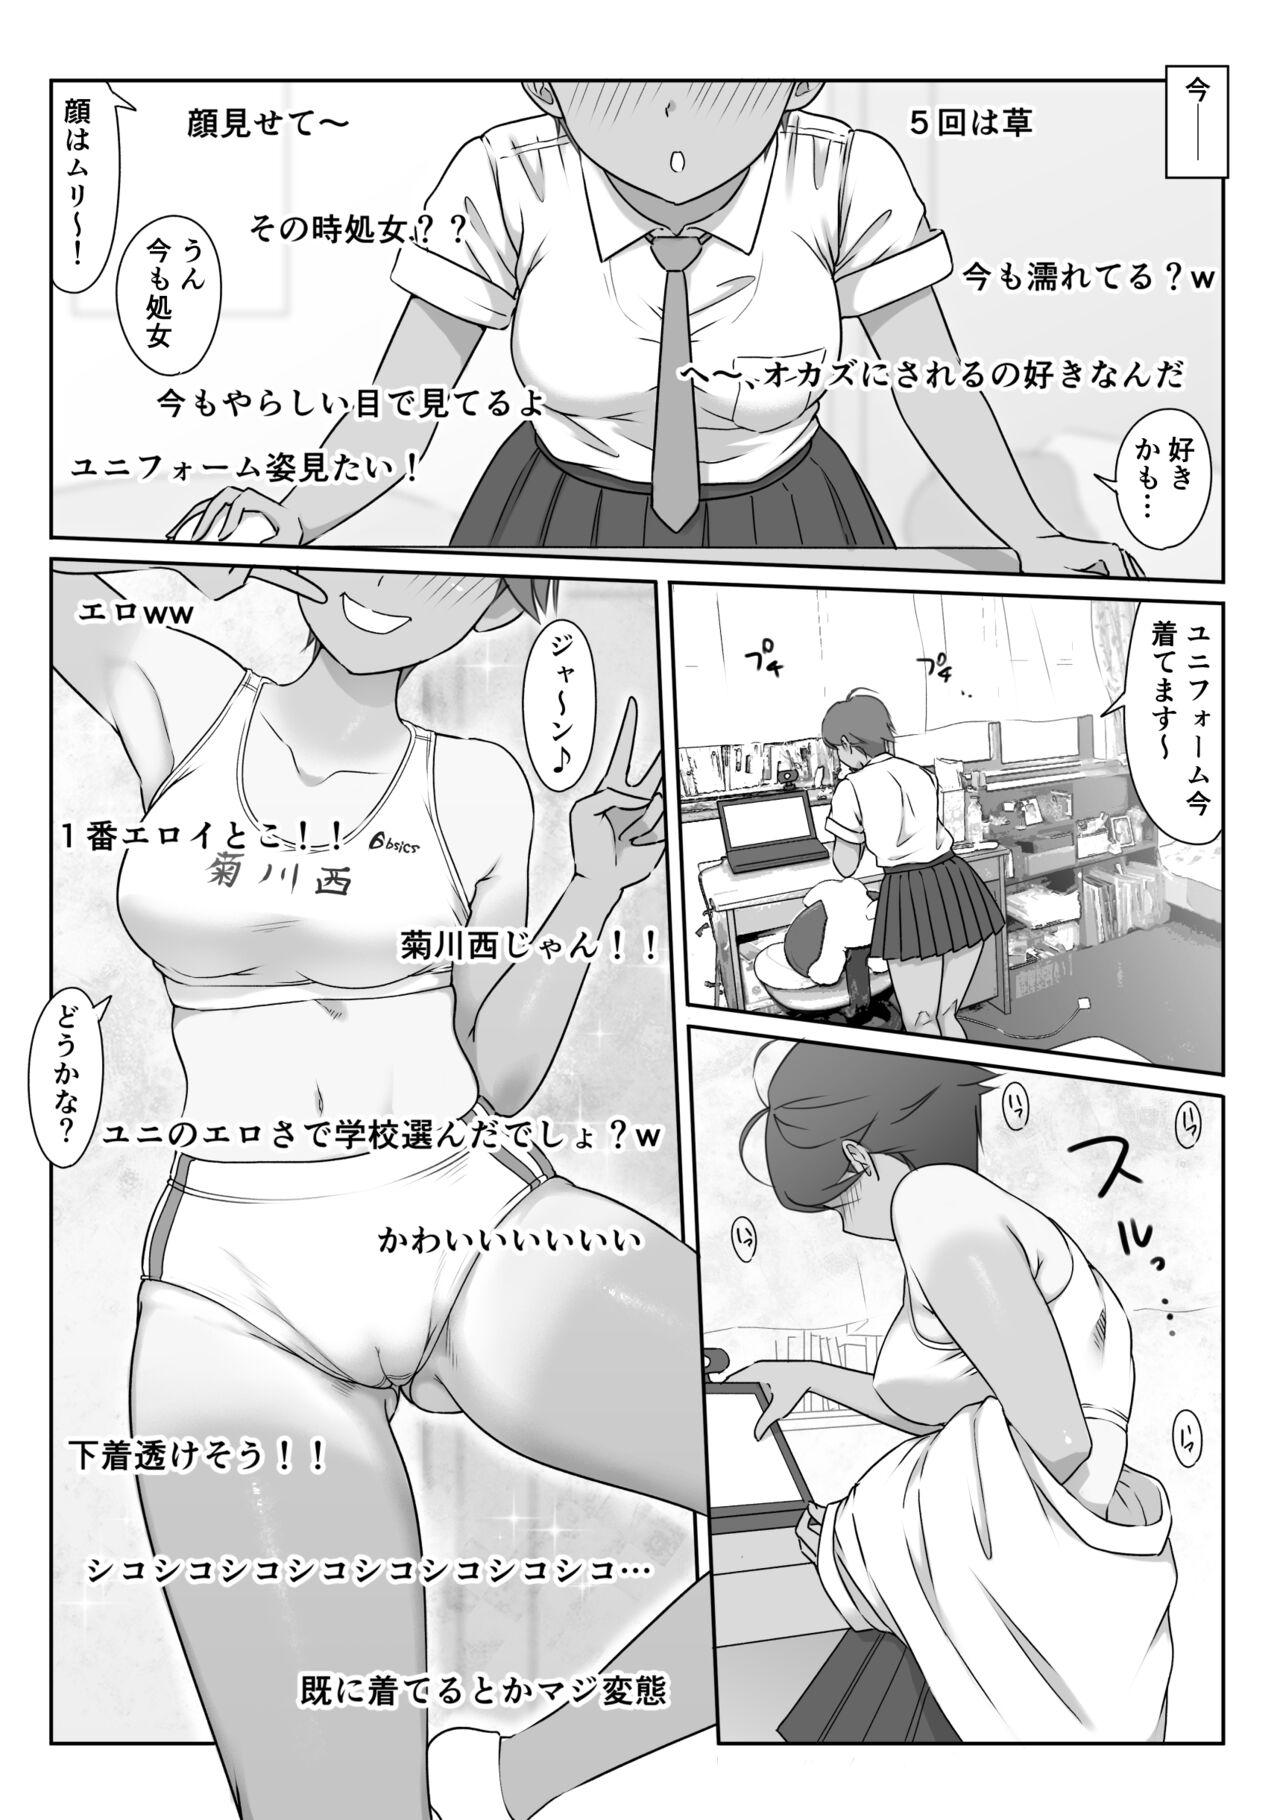 Best Blowjobs Ever ボーイッシュ陸上部明音の秘密配信 Freckles - Page 7